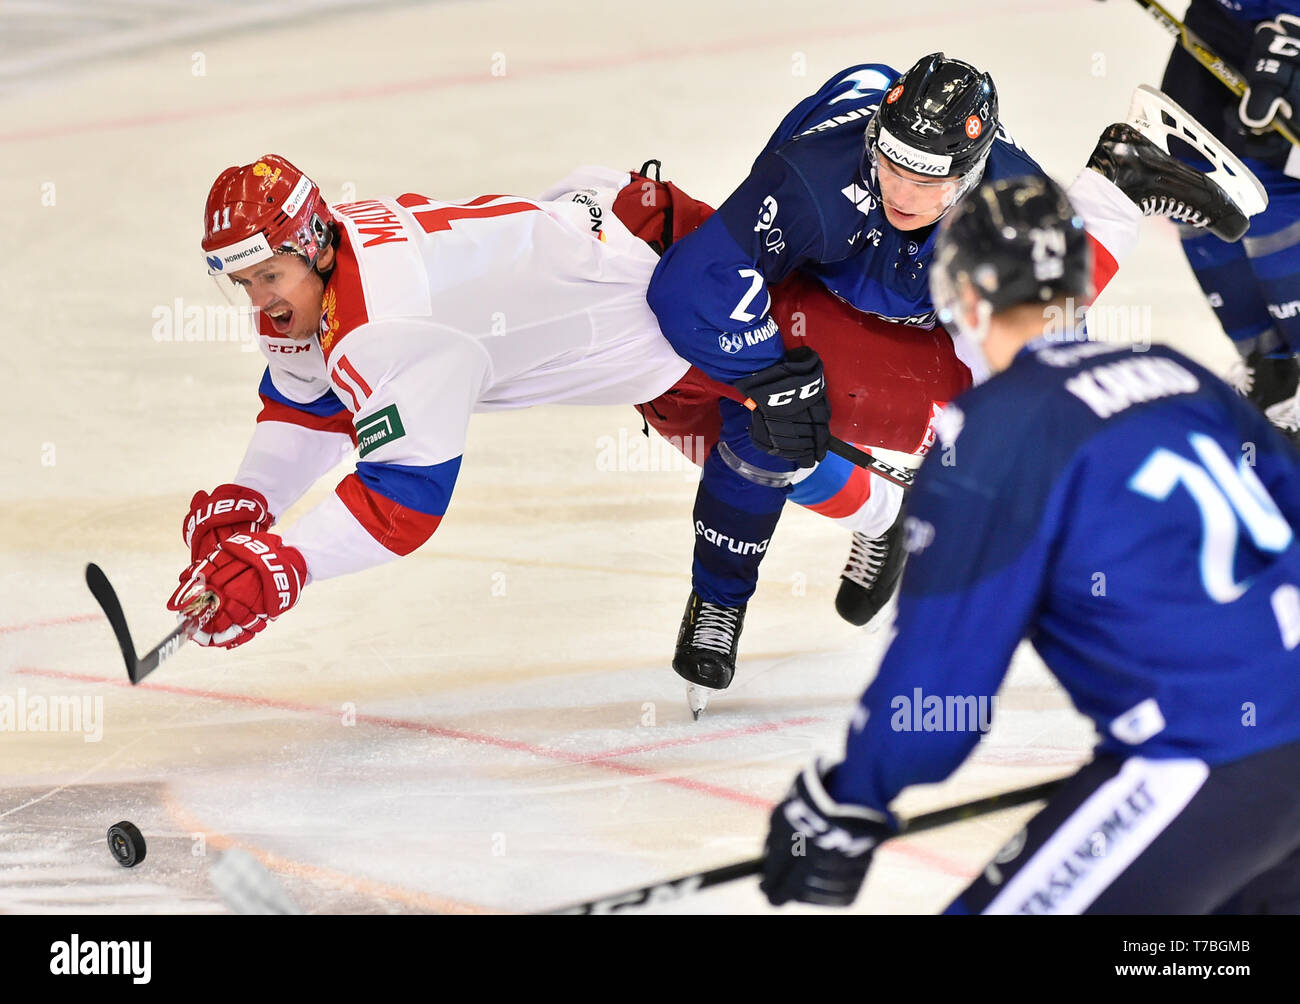 Brno, Czech Republic. 04th May, 2019. L-R Yevgeni Malkin (RUS) and Eetu Luostarinen (FIN) in action during the Russia vs Finland match within Carlson Hockey Games tournament, part of Euro Hockey Tour in Brno, Czech Republic, May 4, 2019. Credit: Lubos Pavlicek/CTK Photo/Alamy Live News Stock Photo